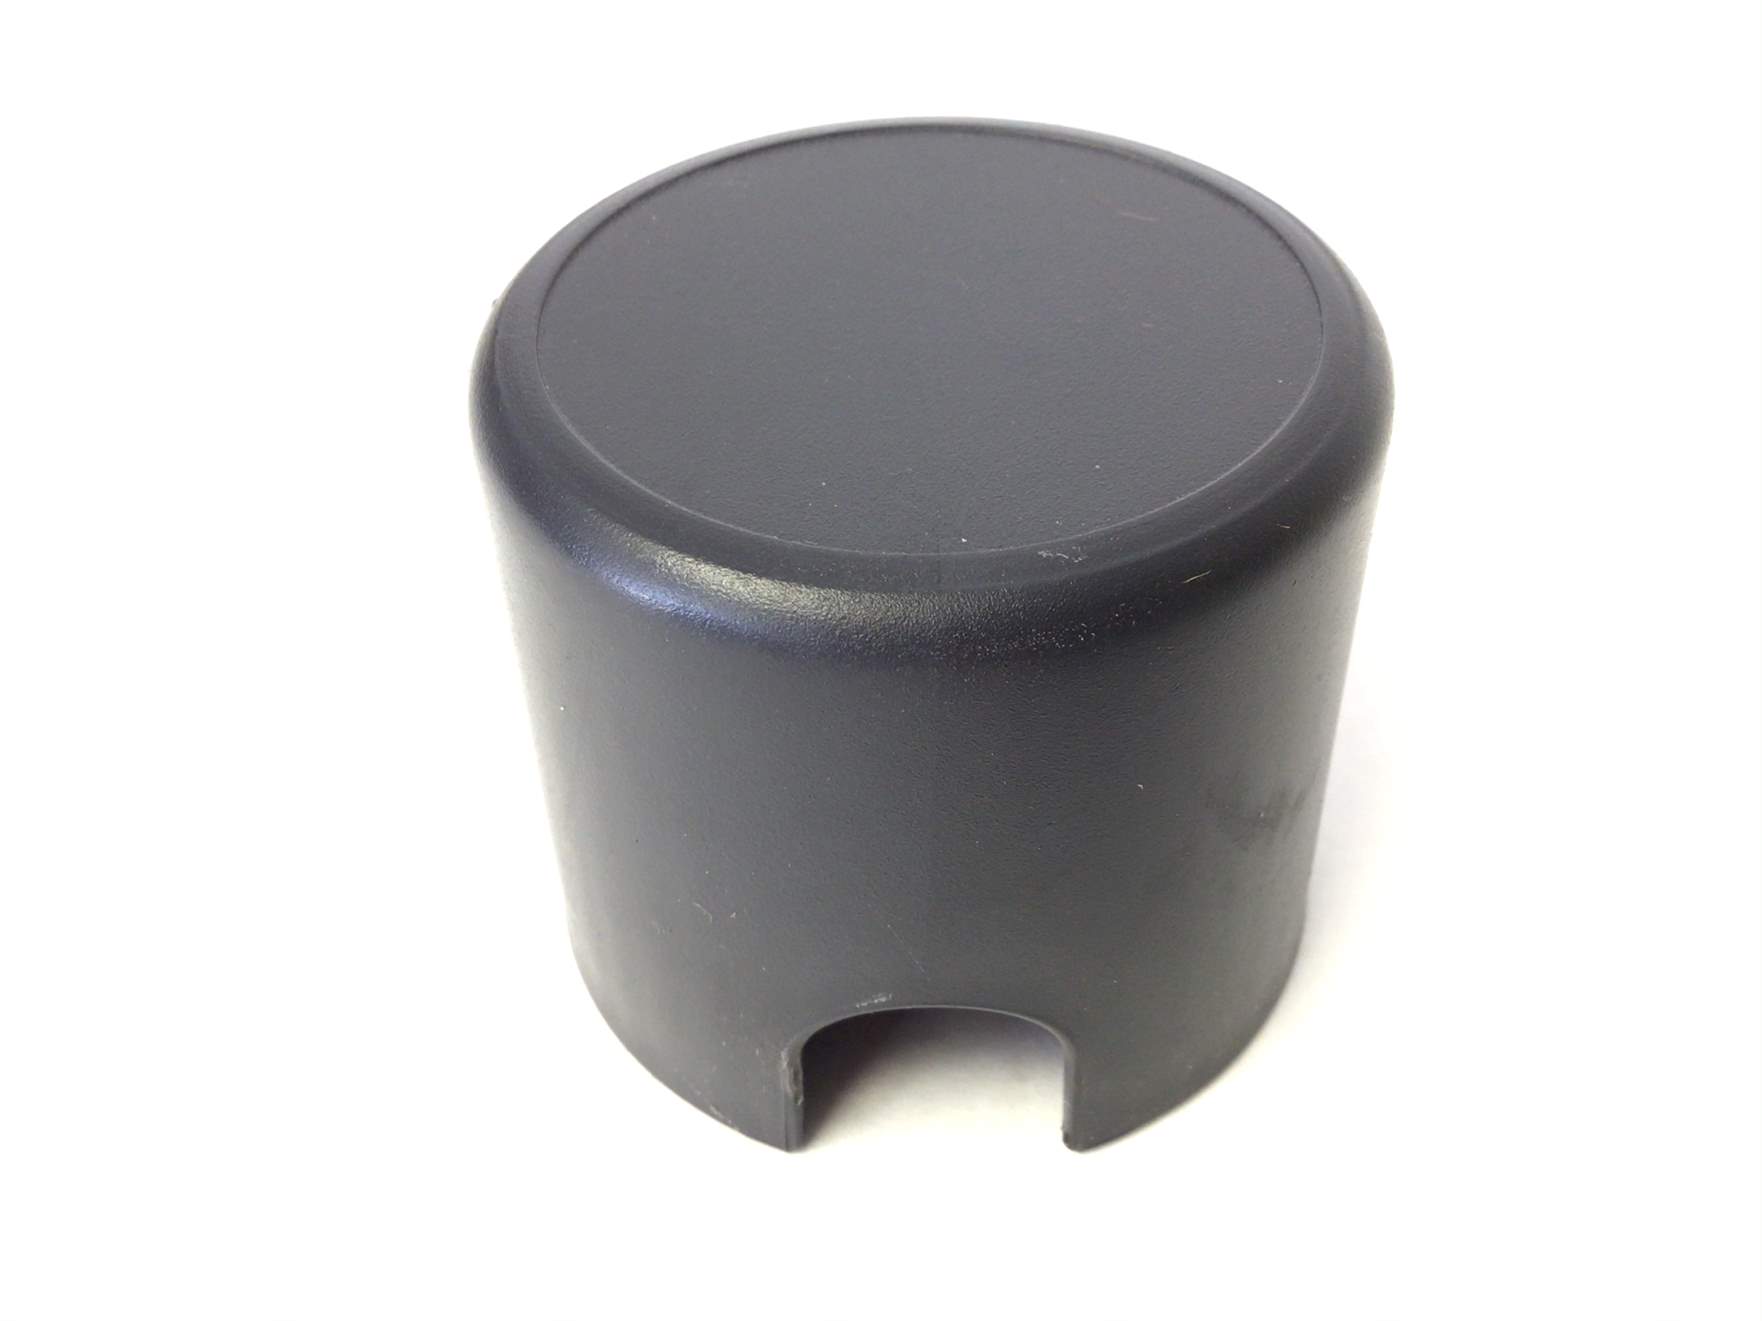 Rear Stabilizer Foot Cap (Used)